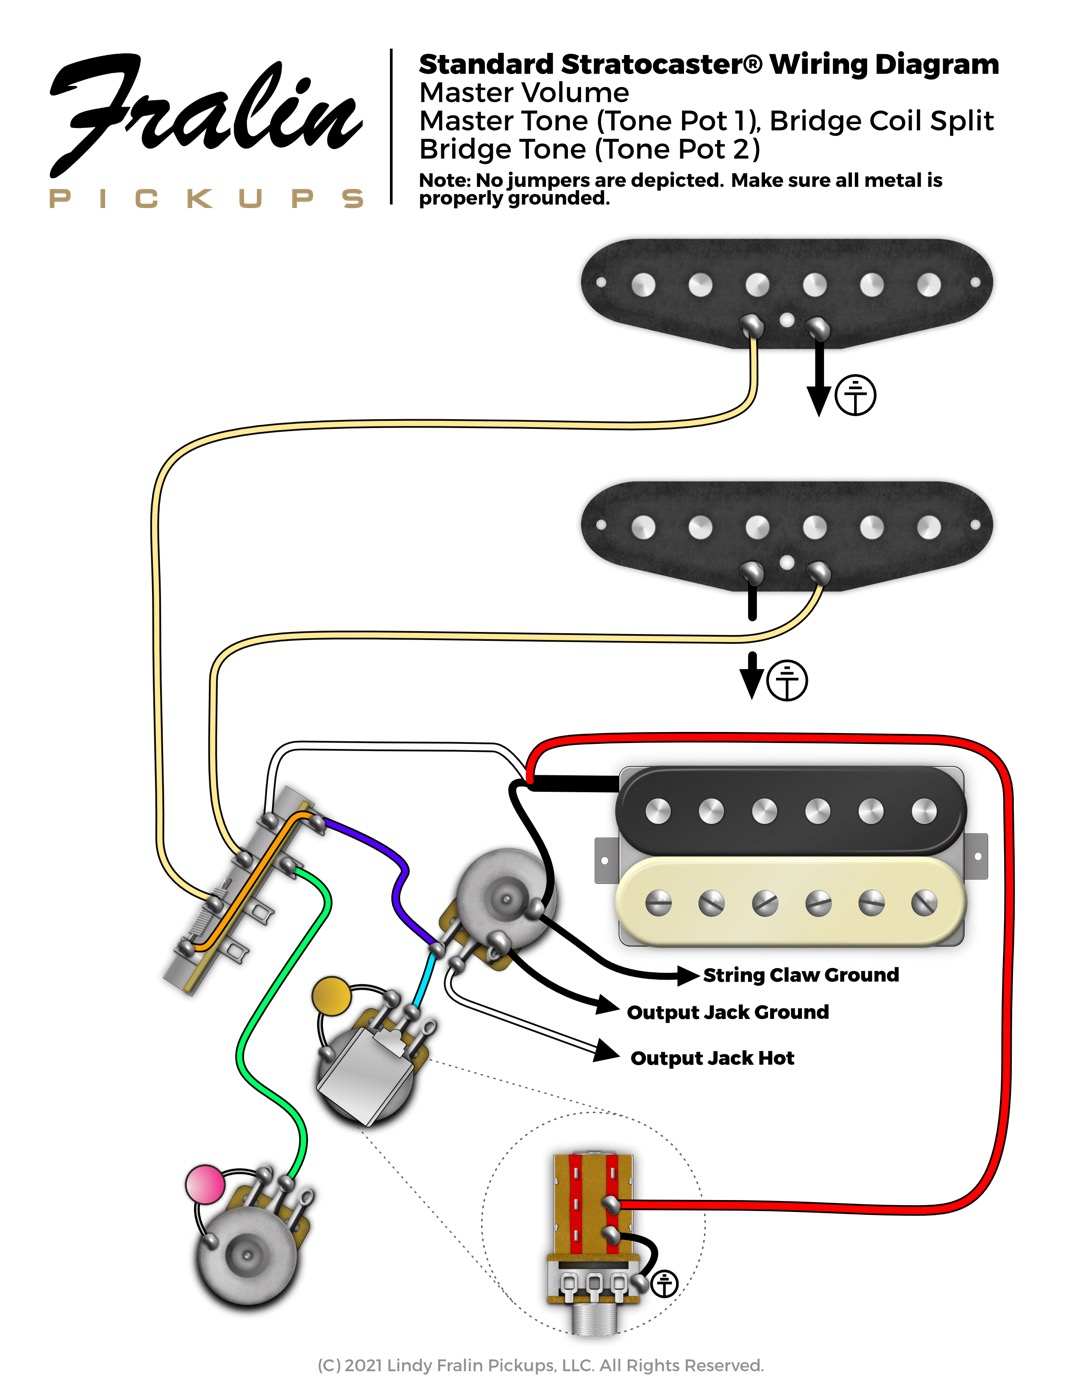 HSS Wiring Diagram with Coil Split